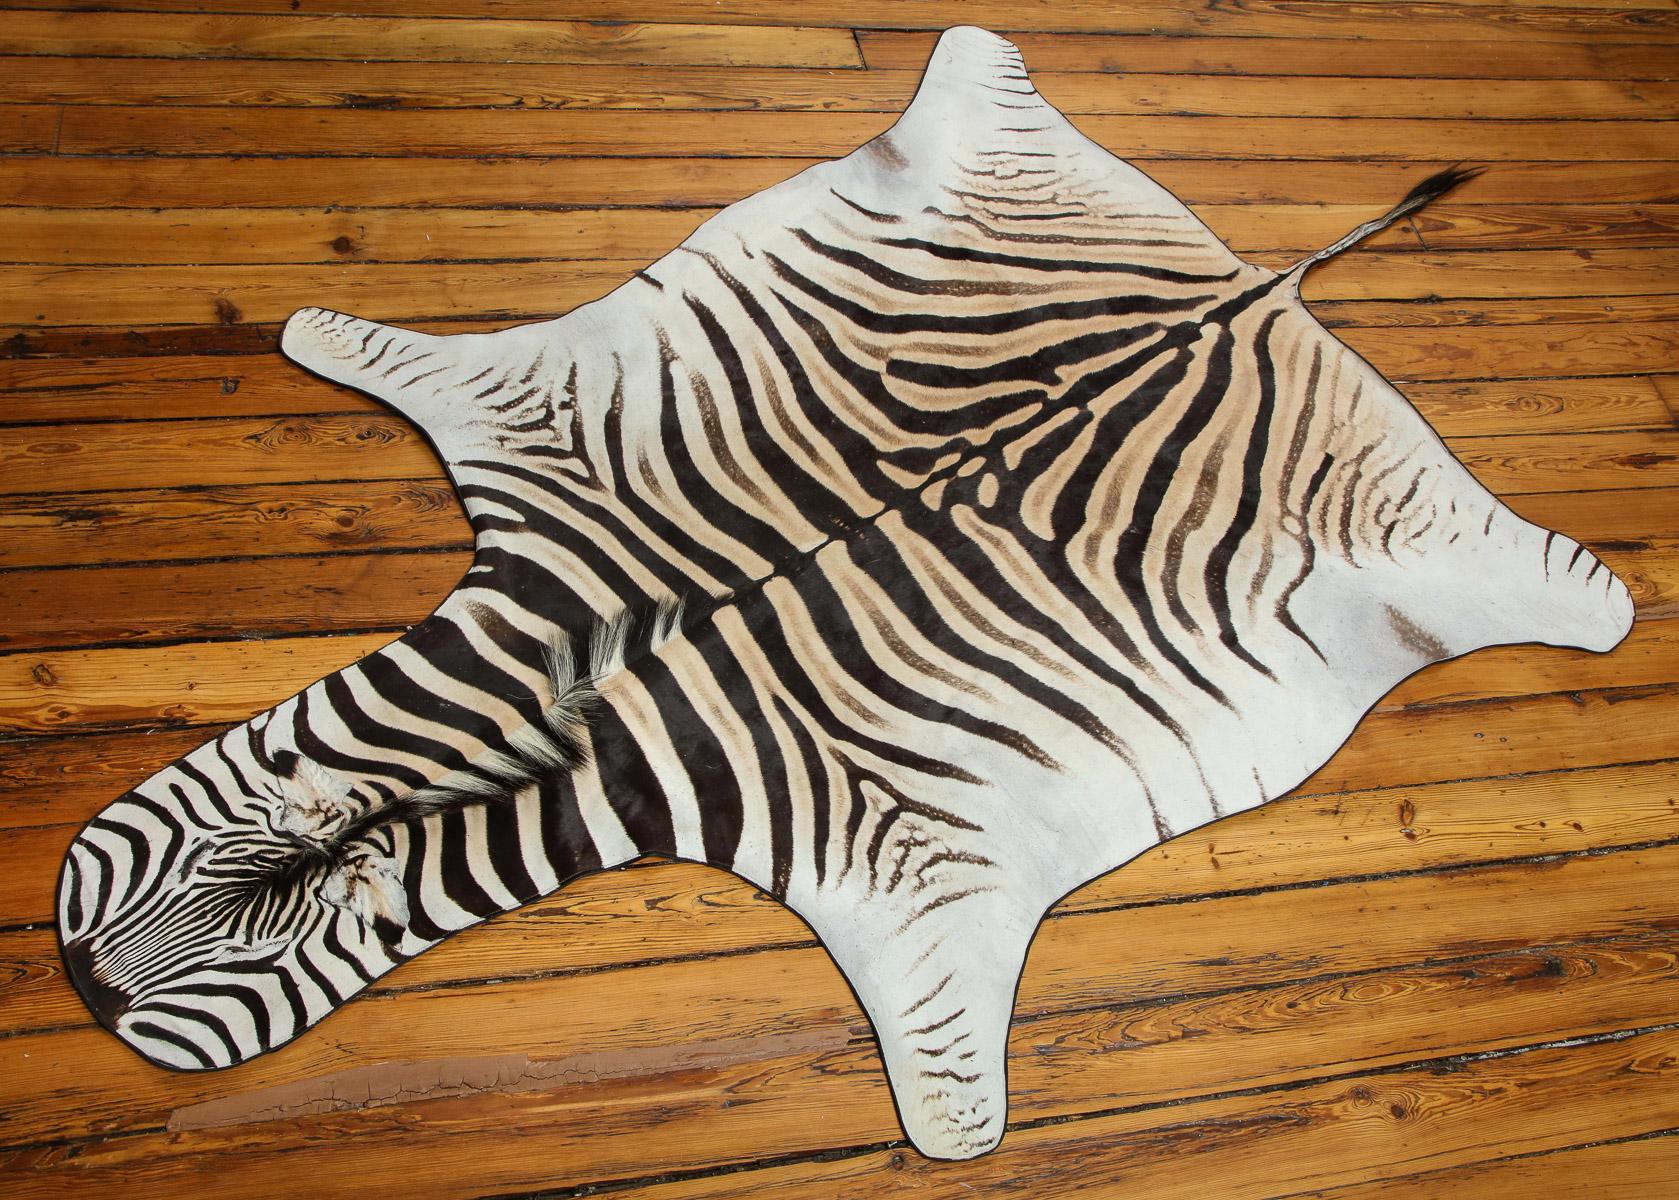 Beautiful zebra rug. This one is extra white which is very hard to find.
Backed with wool felt and trimmed all around with leather.
The zebra hide comes from South Africa.